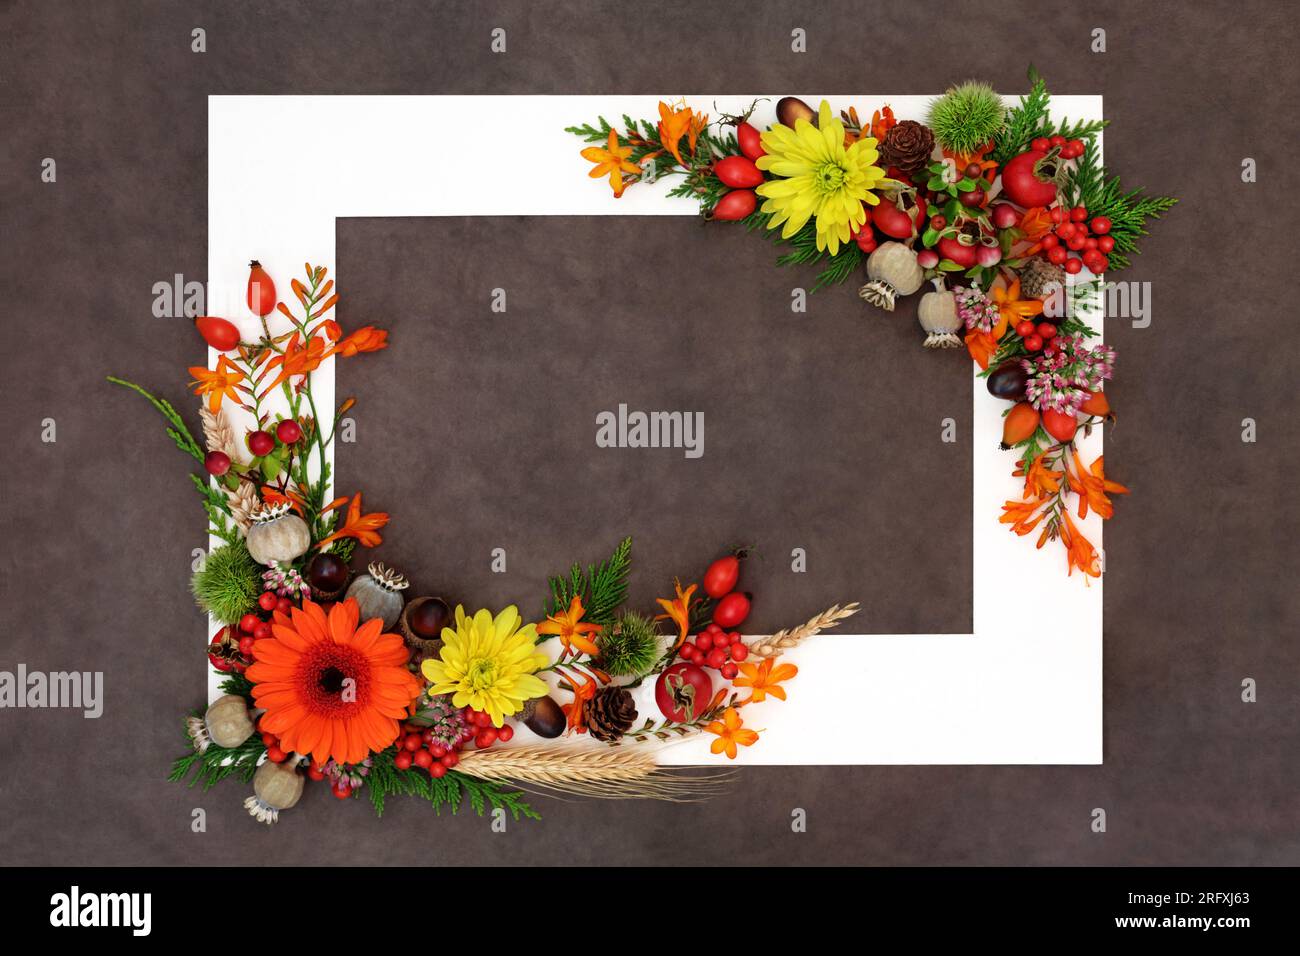 Floral Thanksgiving Autumn Fall nature background border nature concept with flowers, leaves, berry fruit, nuts, barley with white frame. Stock Photo